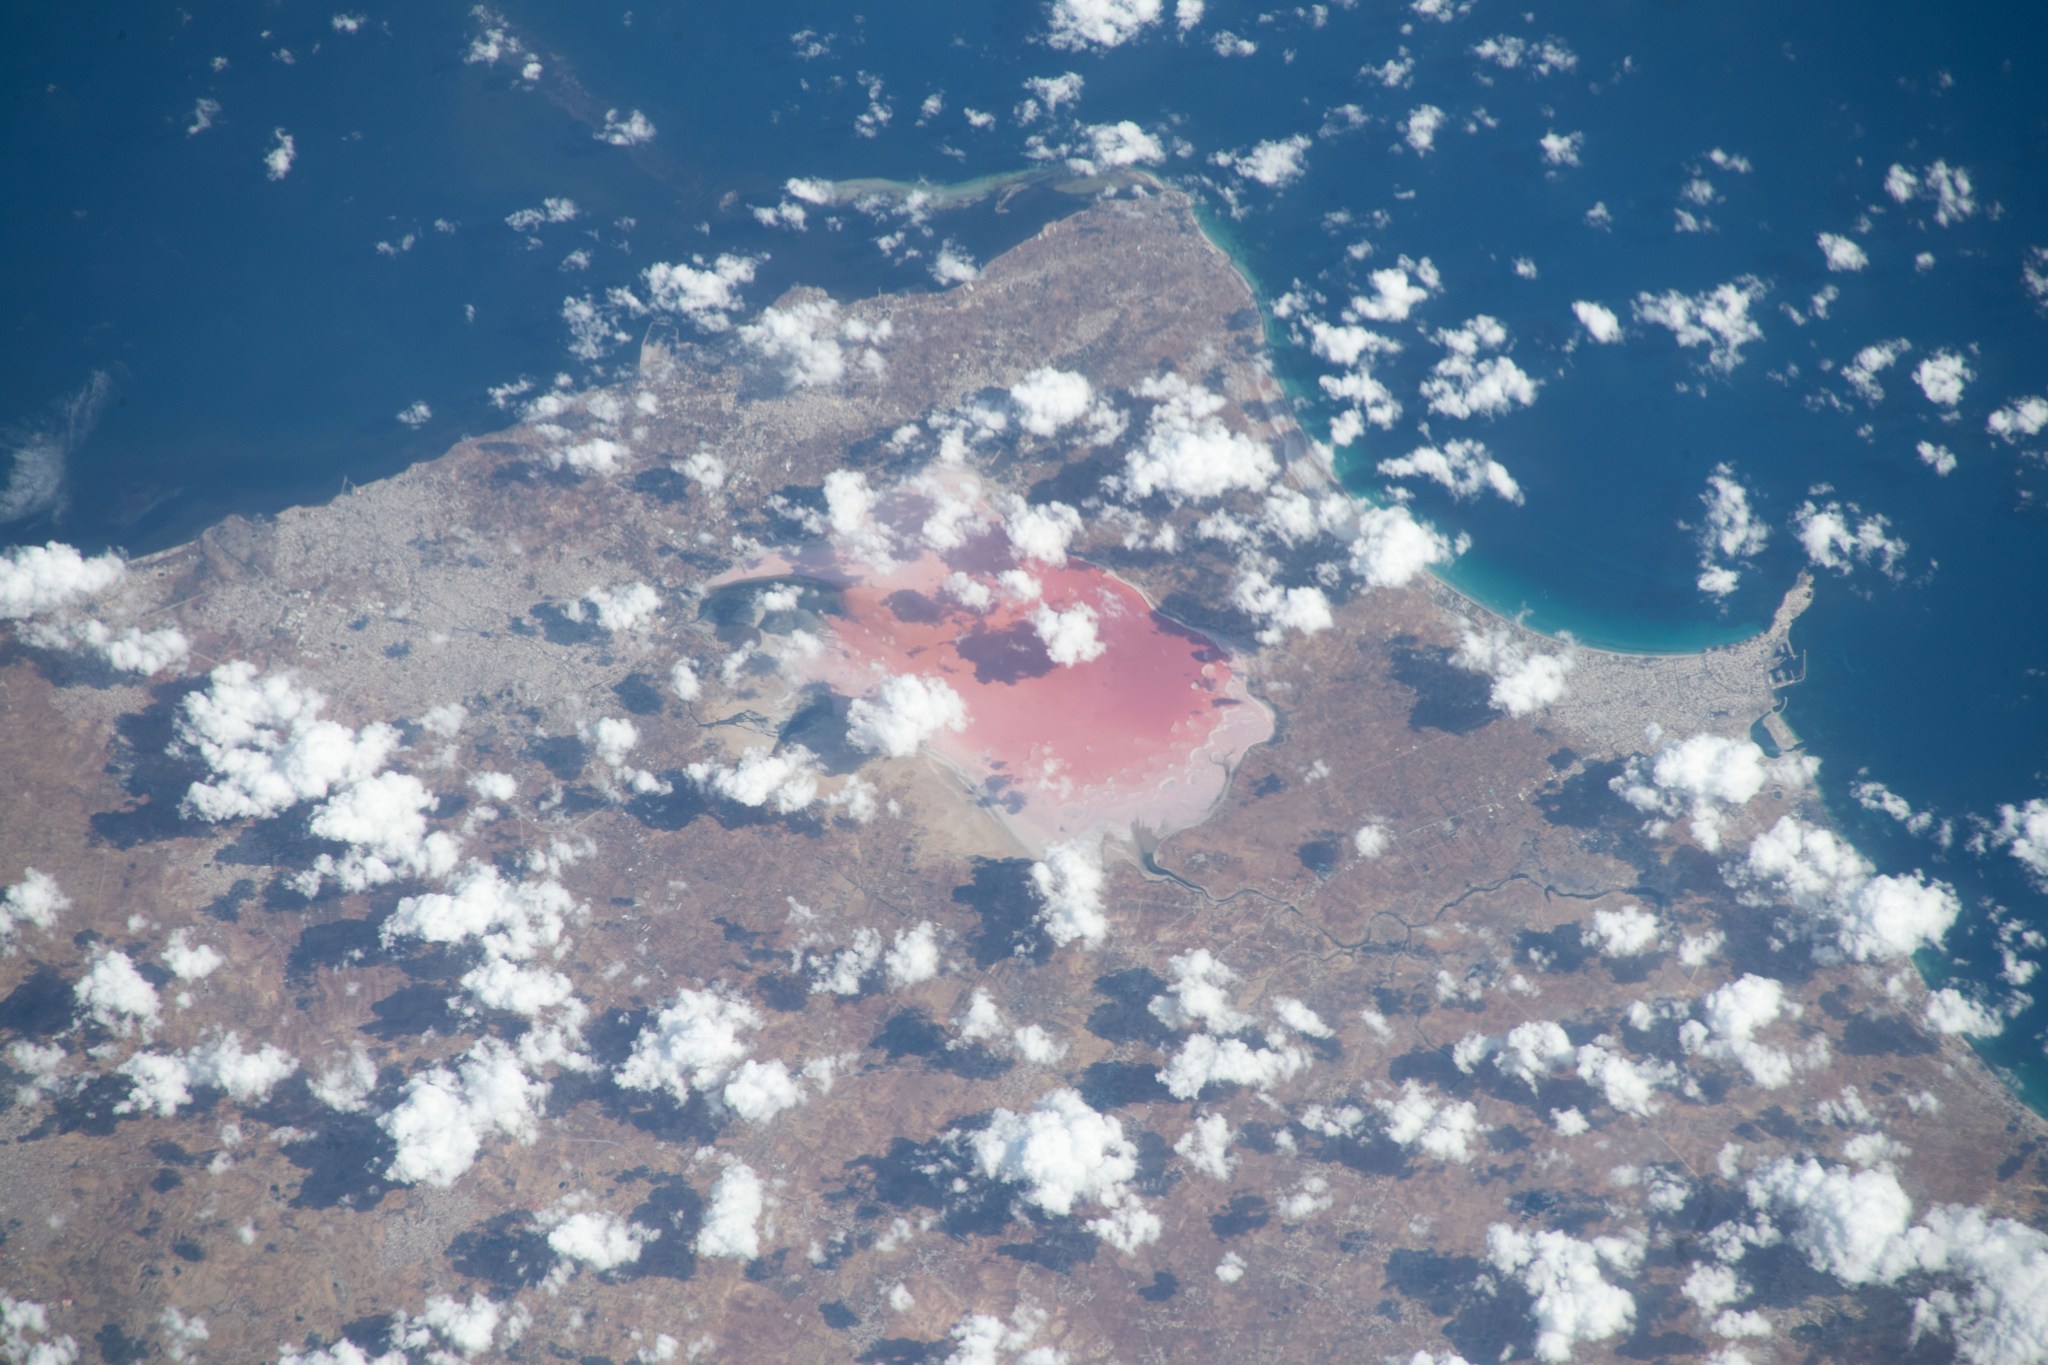 iss070e002574 (Oct. 7, 2023) -- Clouds hover around the coast of Tunisia as the International Space Station soars 260 miles above. Near the center peak where the coastline meets the Mediterranean Sea, the pink salt lake of Sebkha of Moknine is visible. With little inflow from rivers and streams, the lake is fed by rainfall which flushes vibrant colors into the basin, leaving behind remnants of a "salt pan," the white crust of salt and minerals bordering the water.